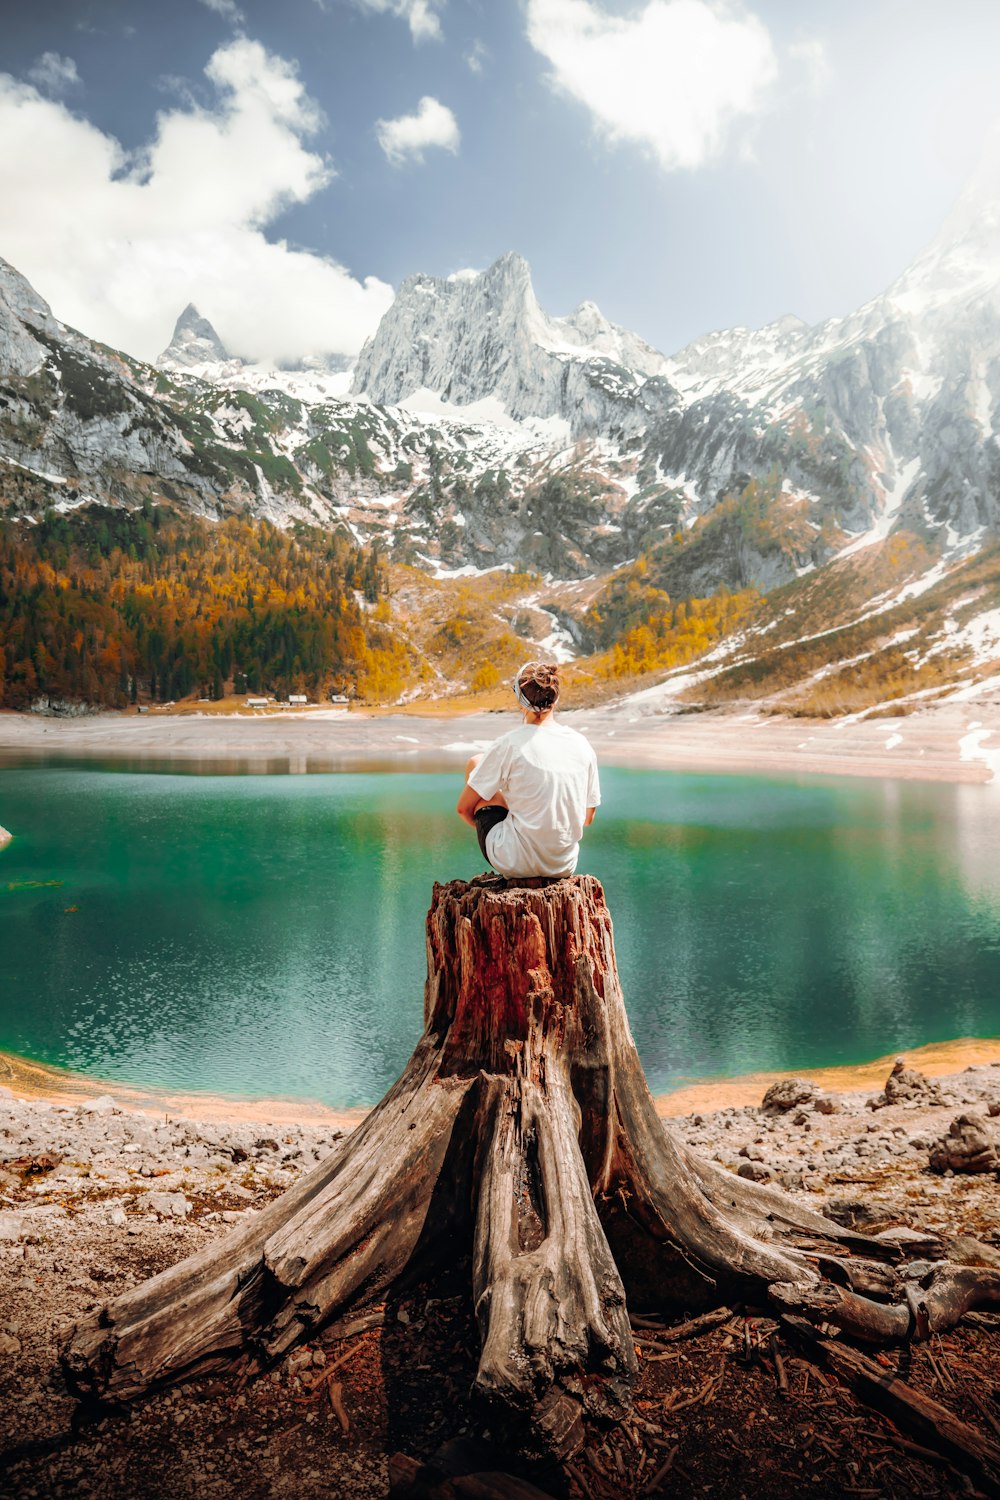 a man sitting on top of a tree stump next to a lake